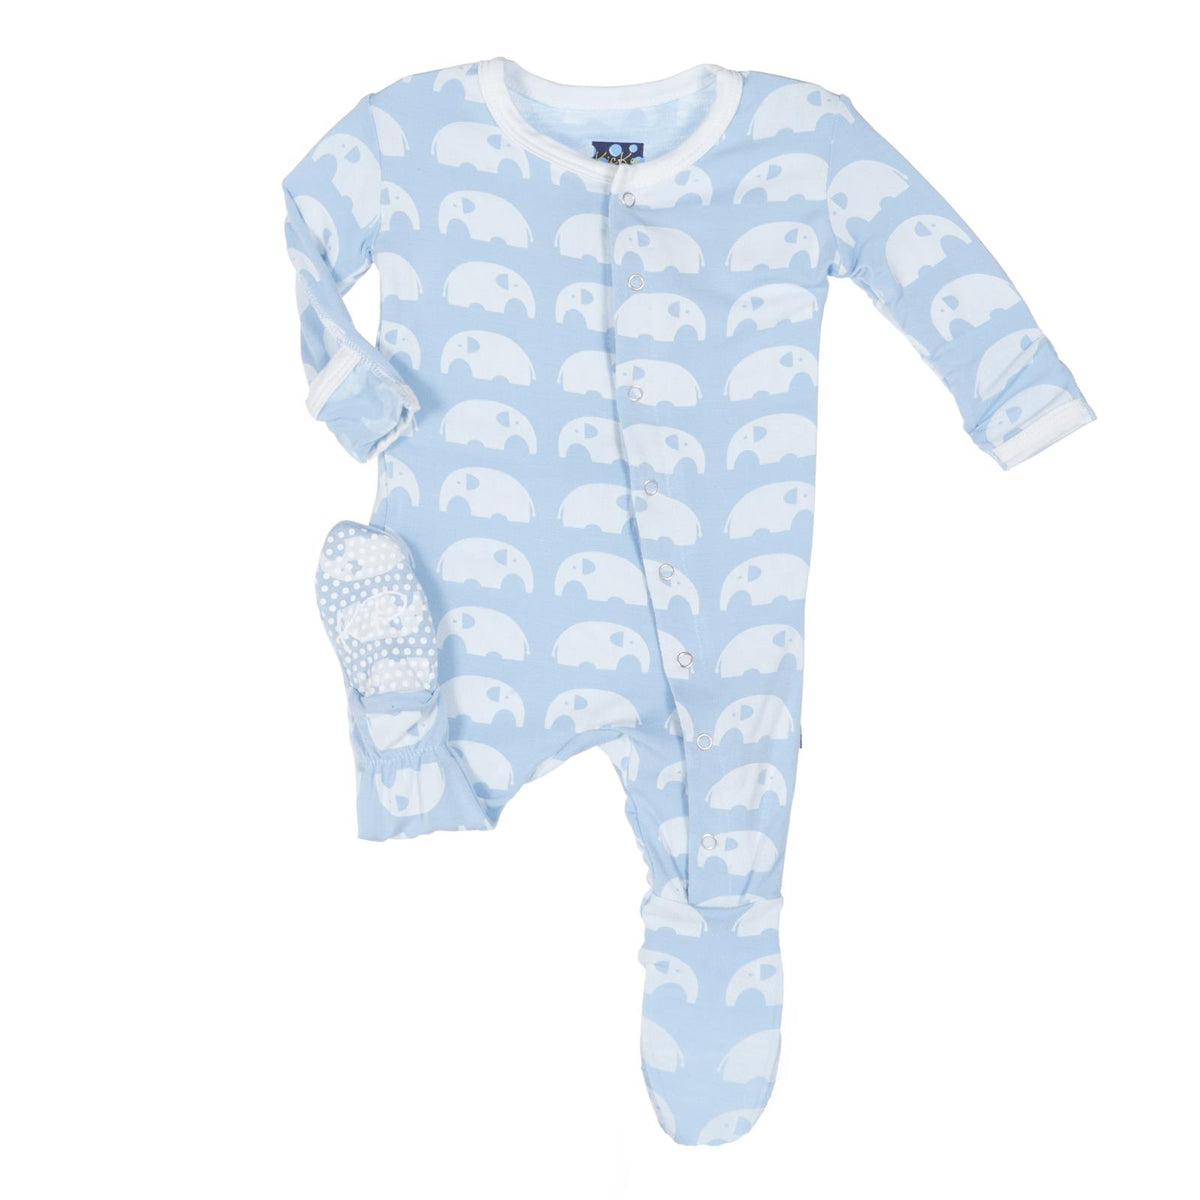 Kickee Pants Footie with Snaps: Pond Elephant